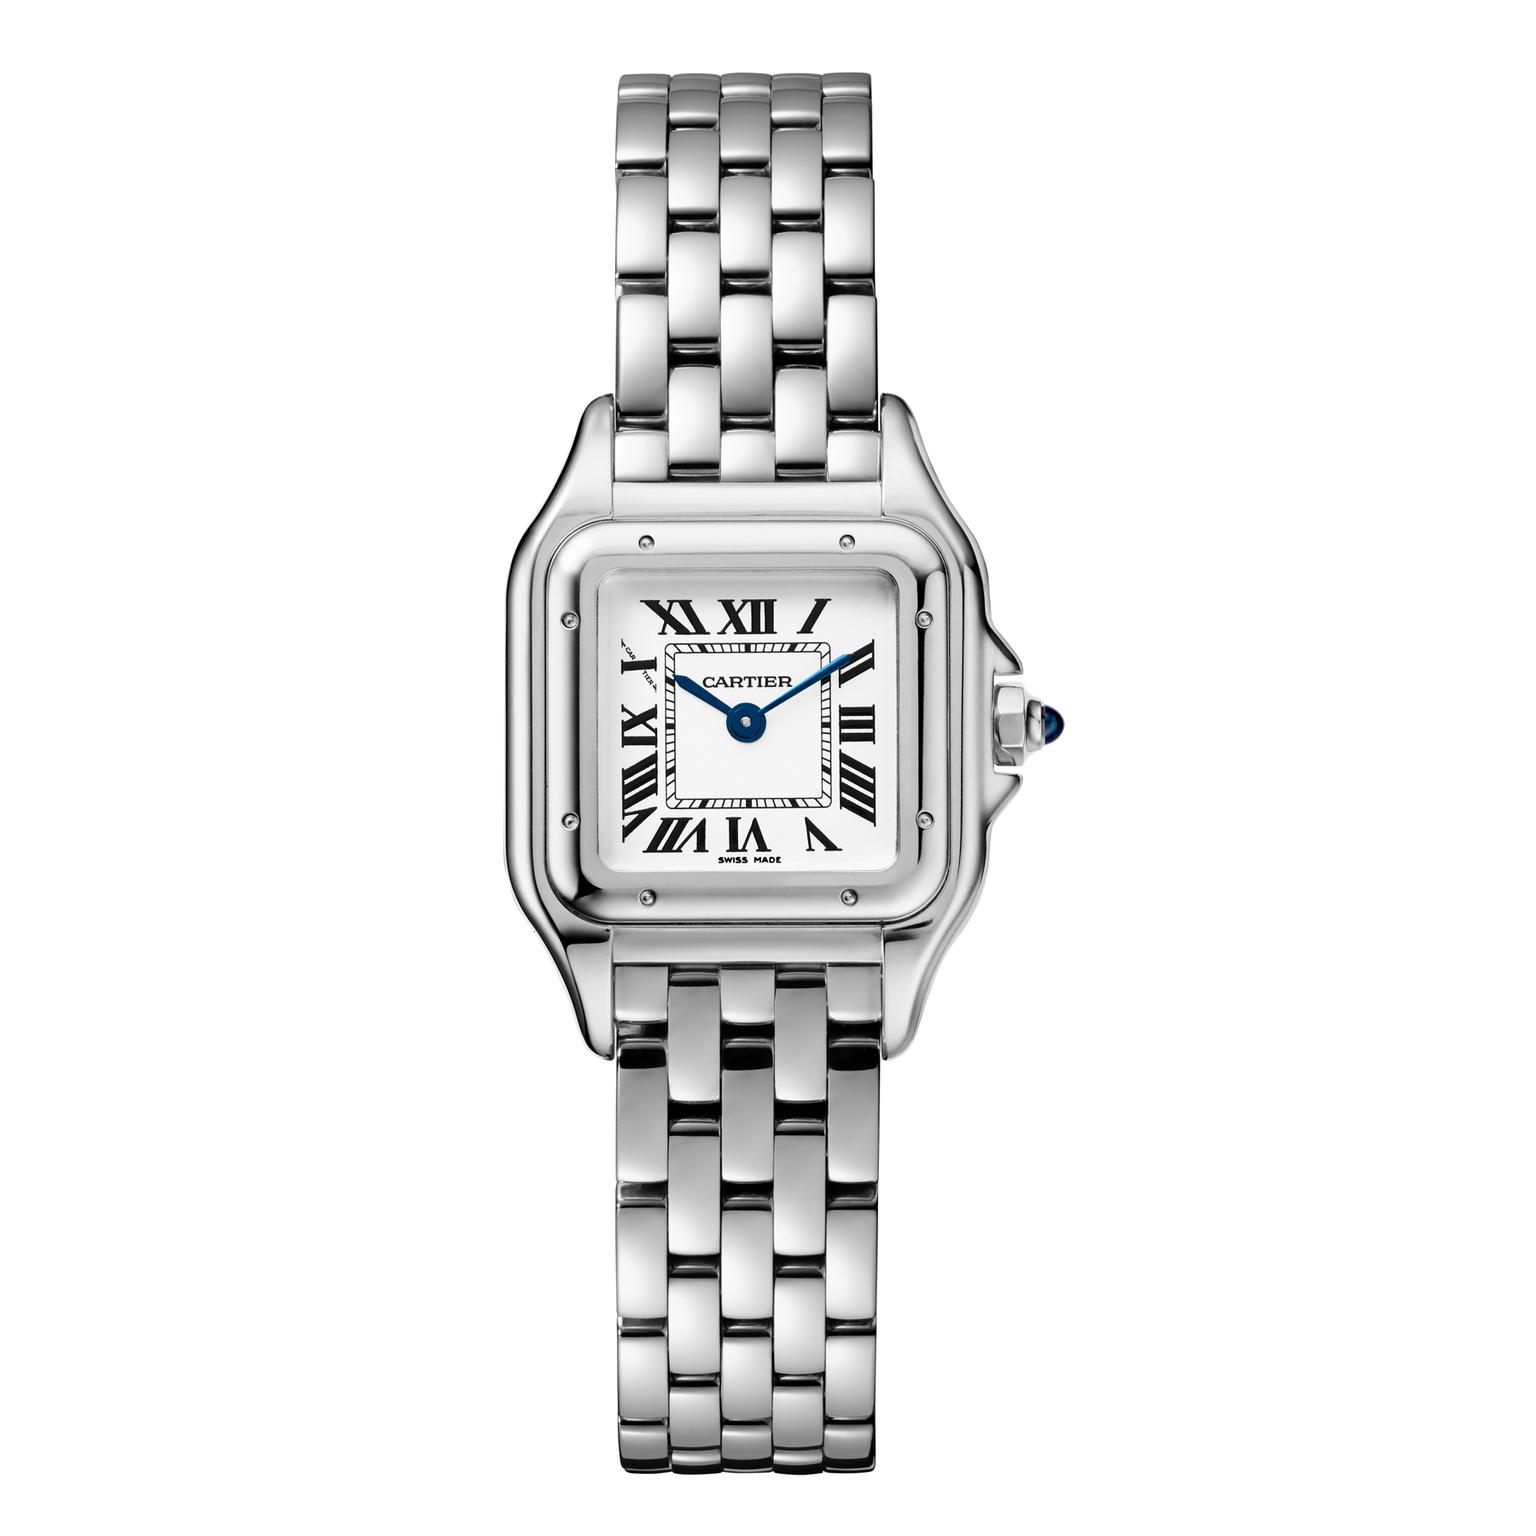 Small size Panthère de Cartier watch in stainless steel 